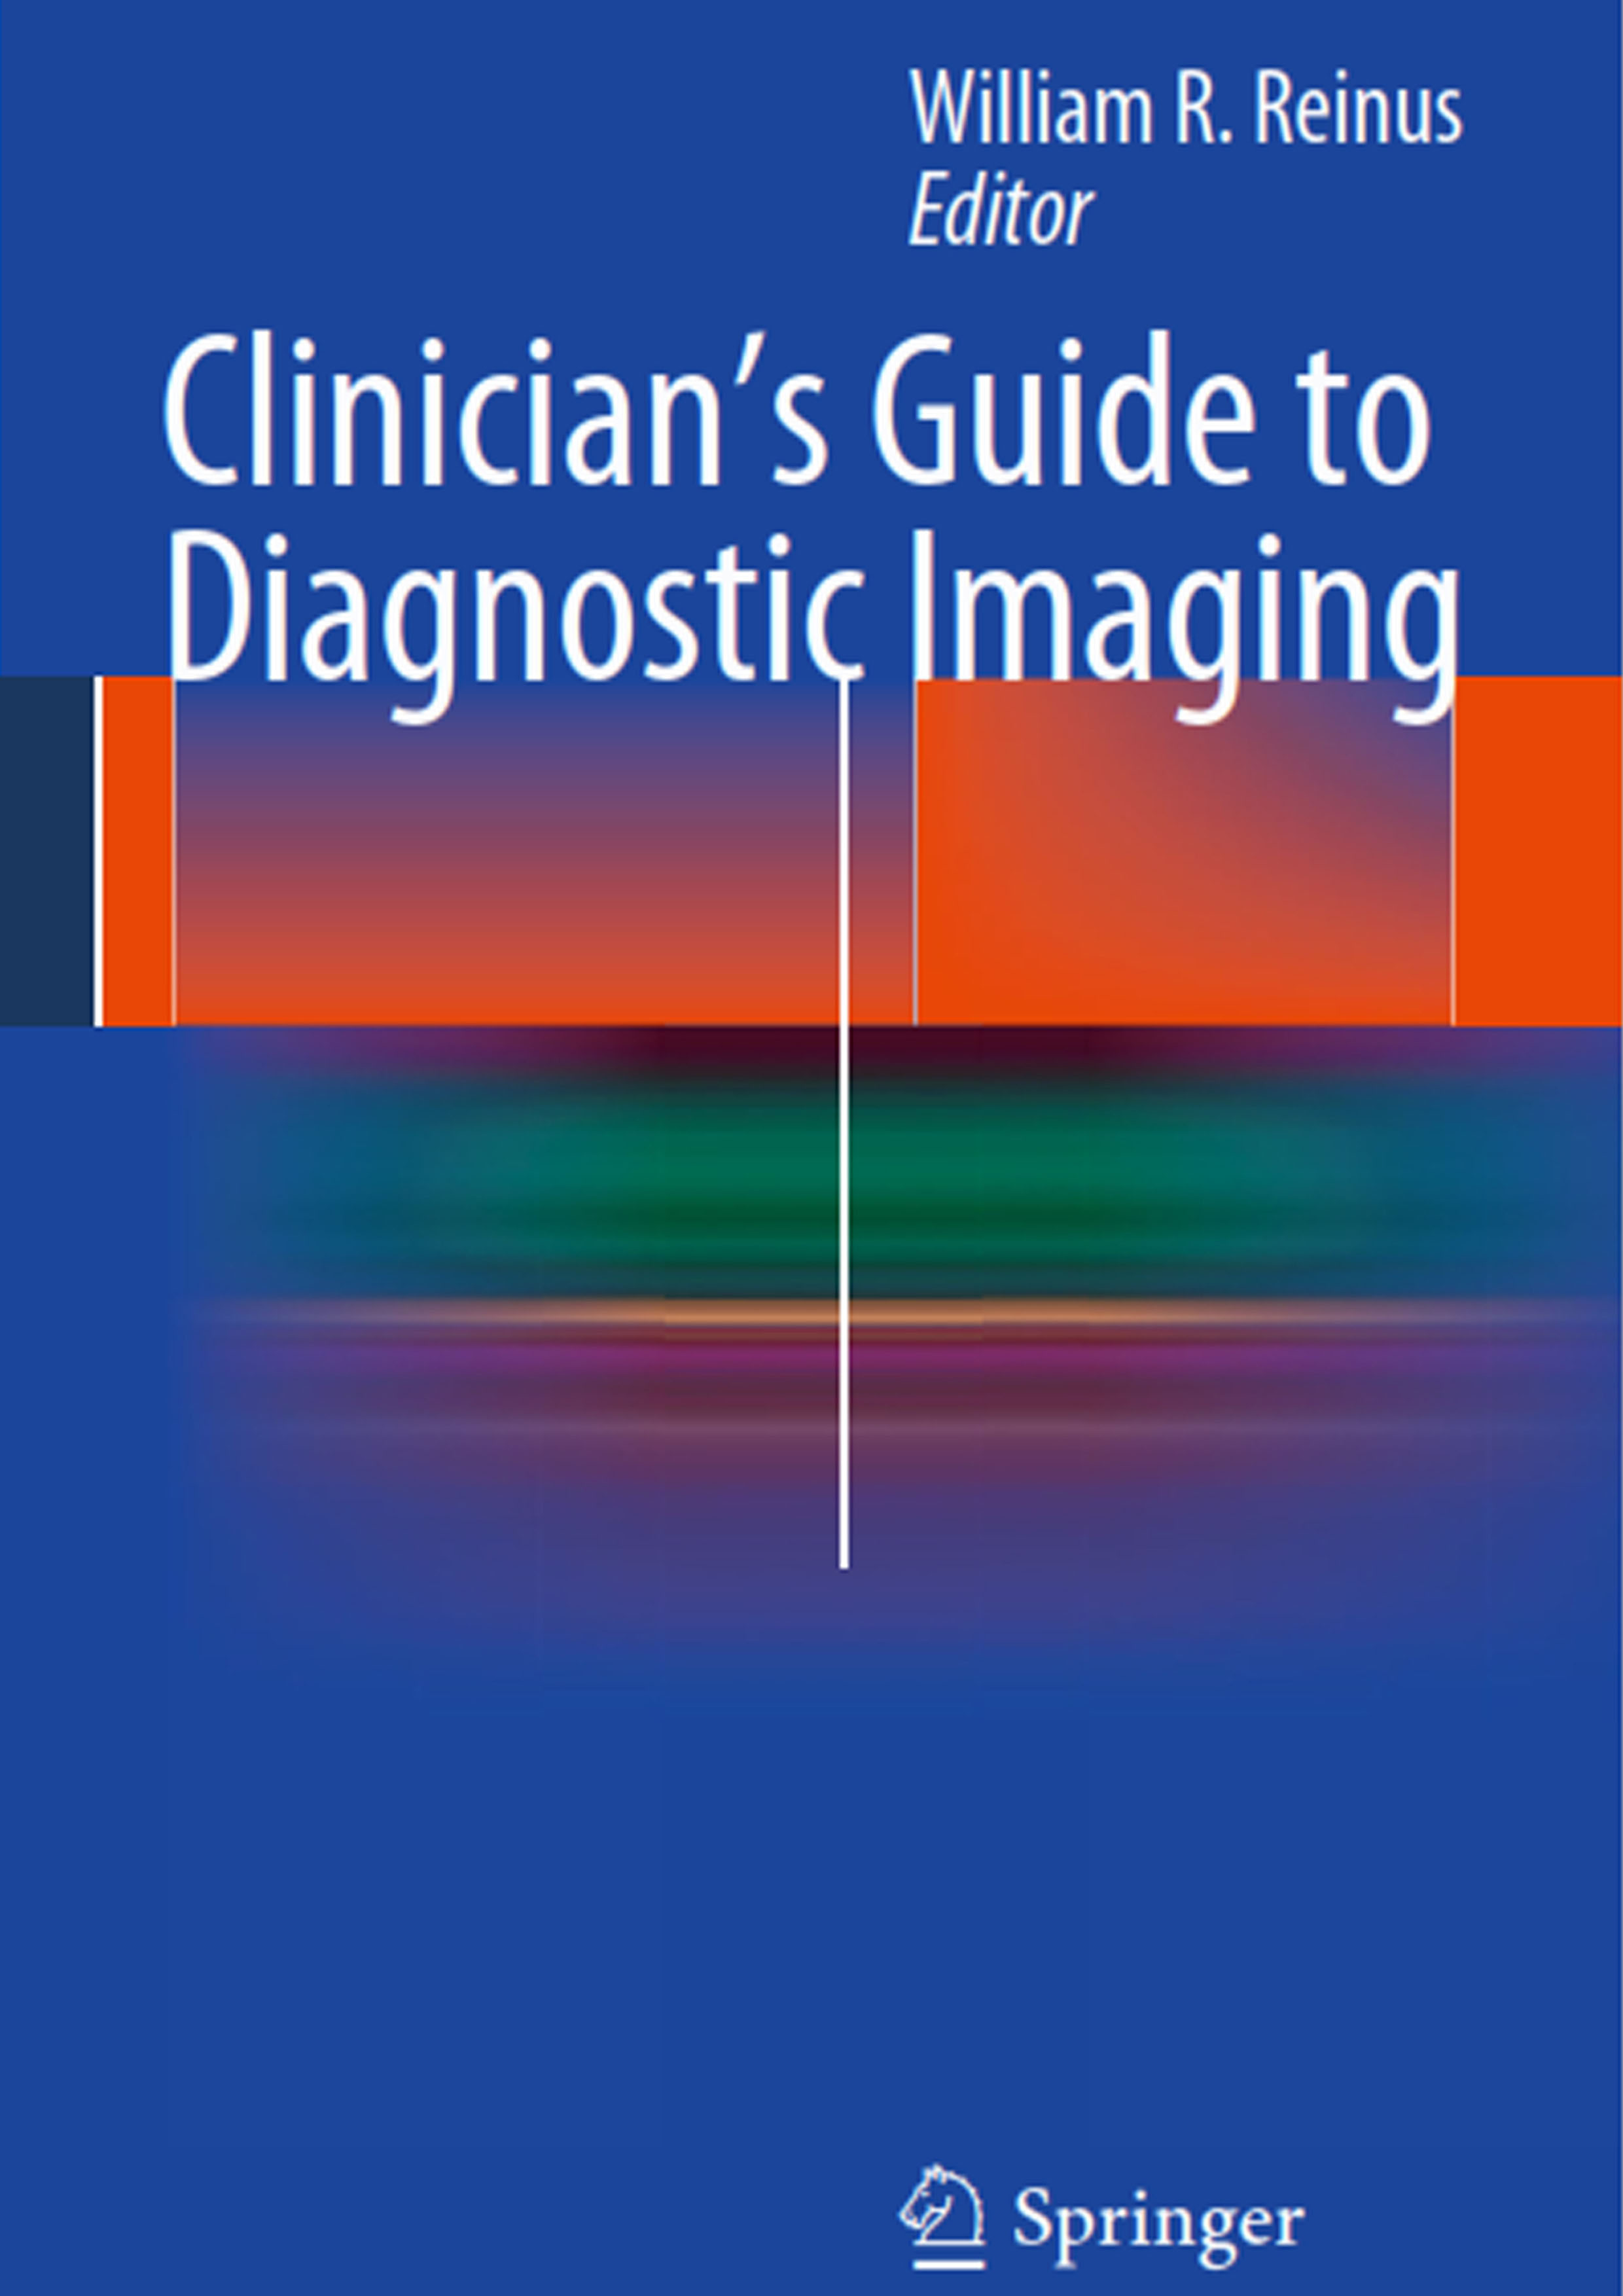 Reinus - Clinician’s Guide to Diagnostic Imaging